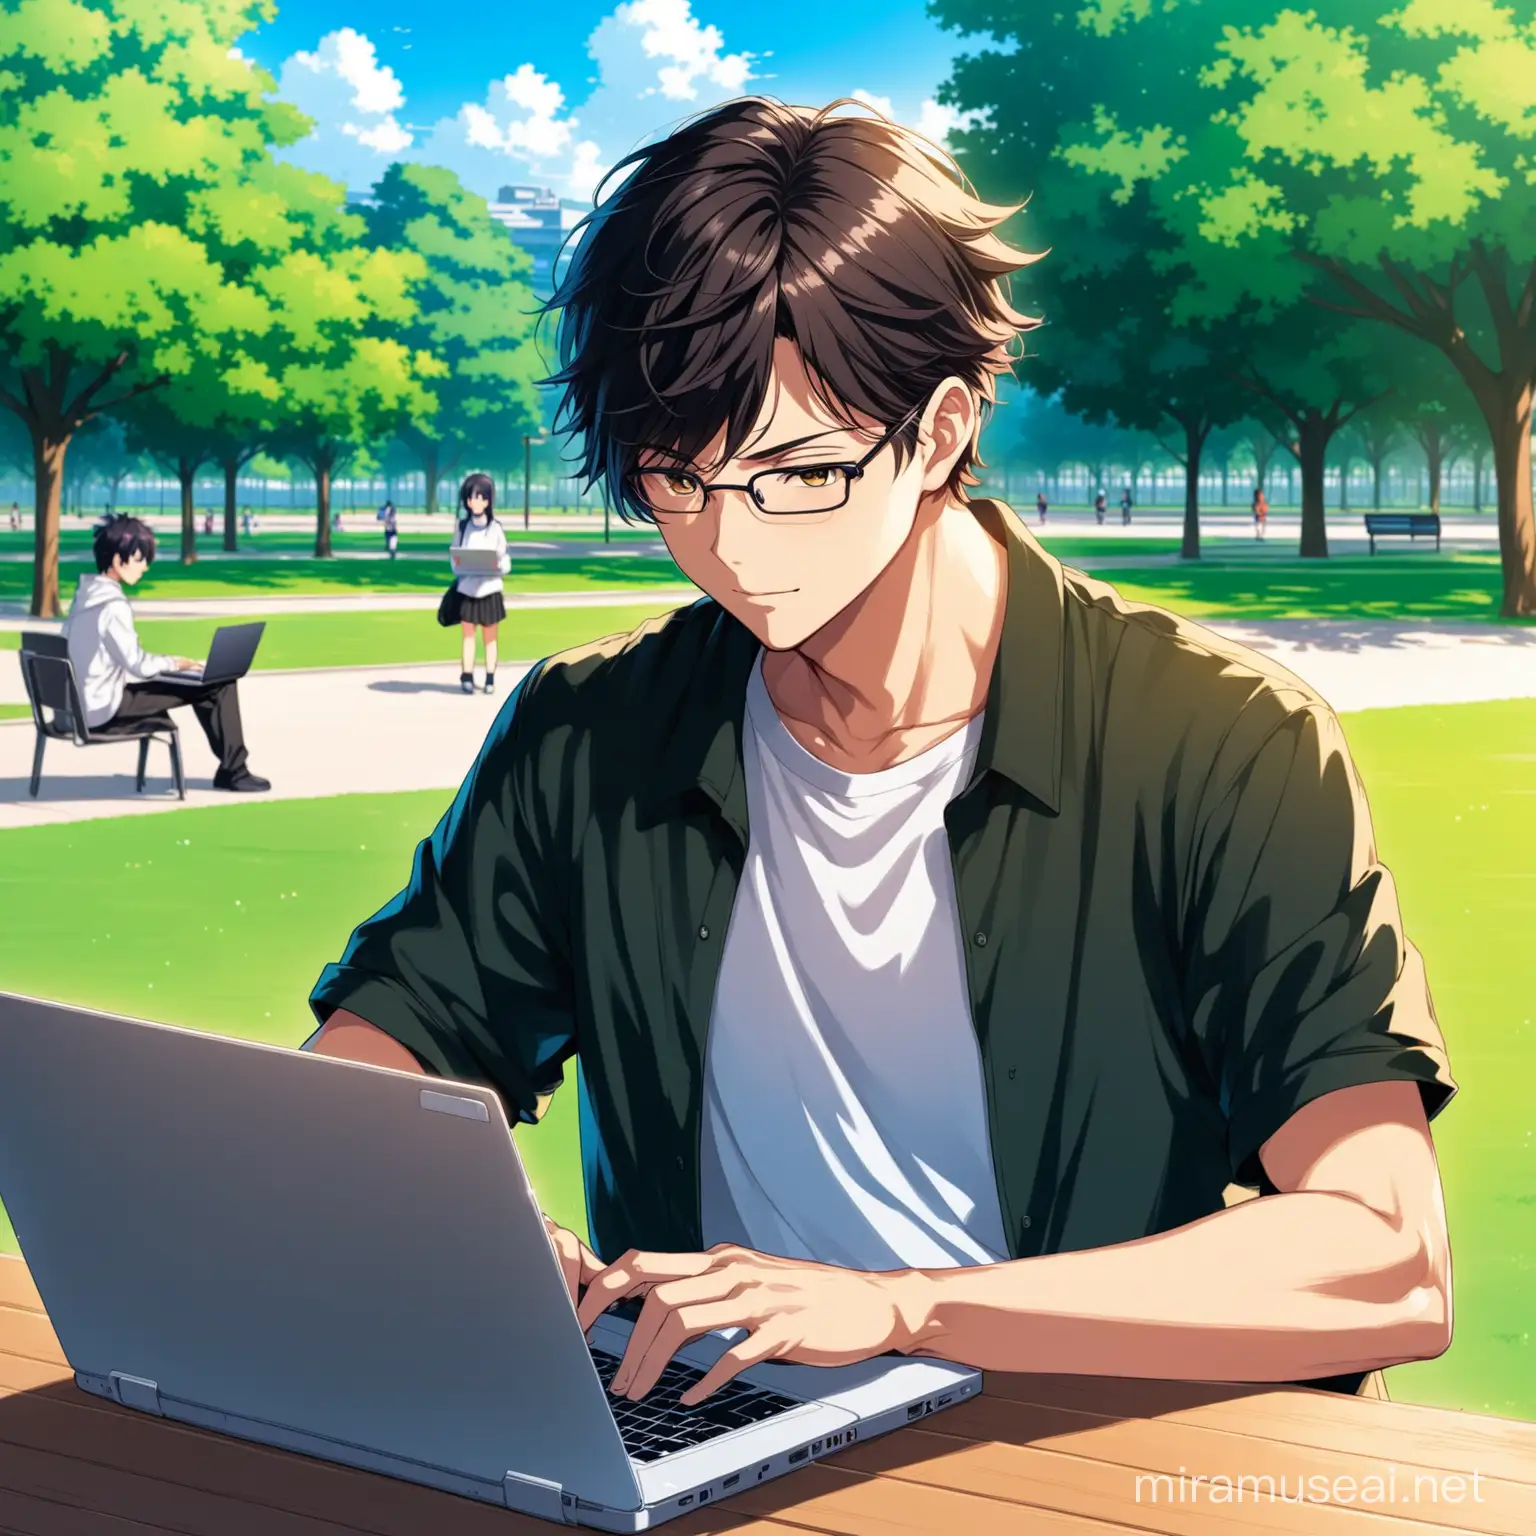 Focused Anime Student Working on Laptop in Park Setting